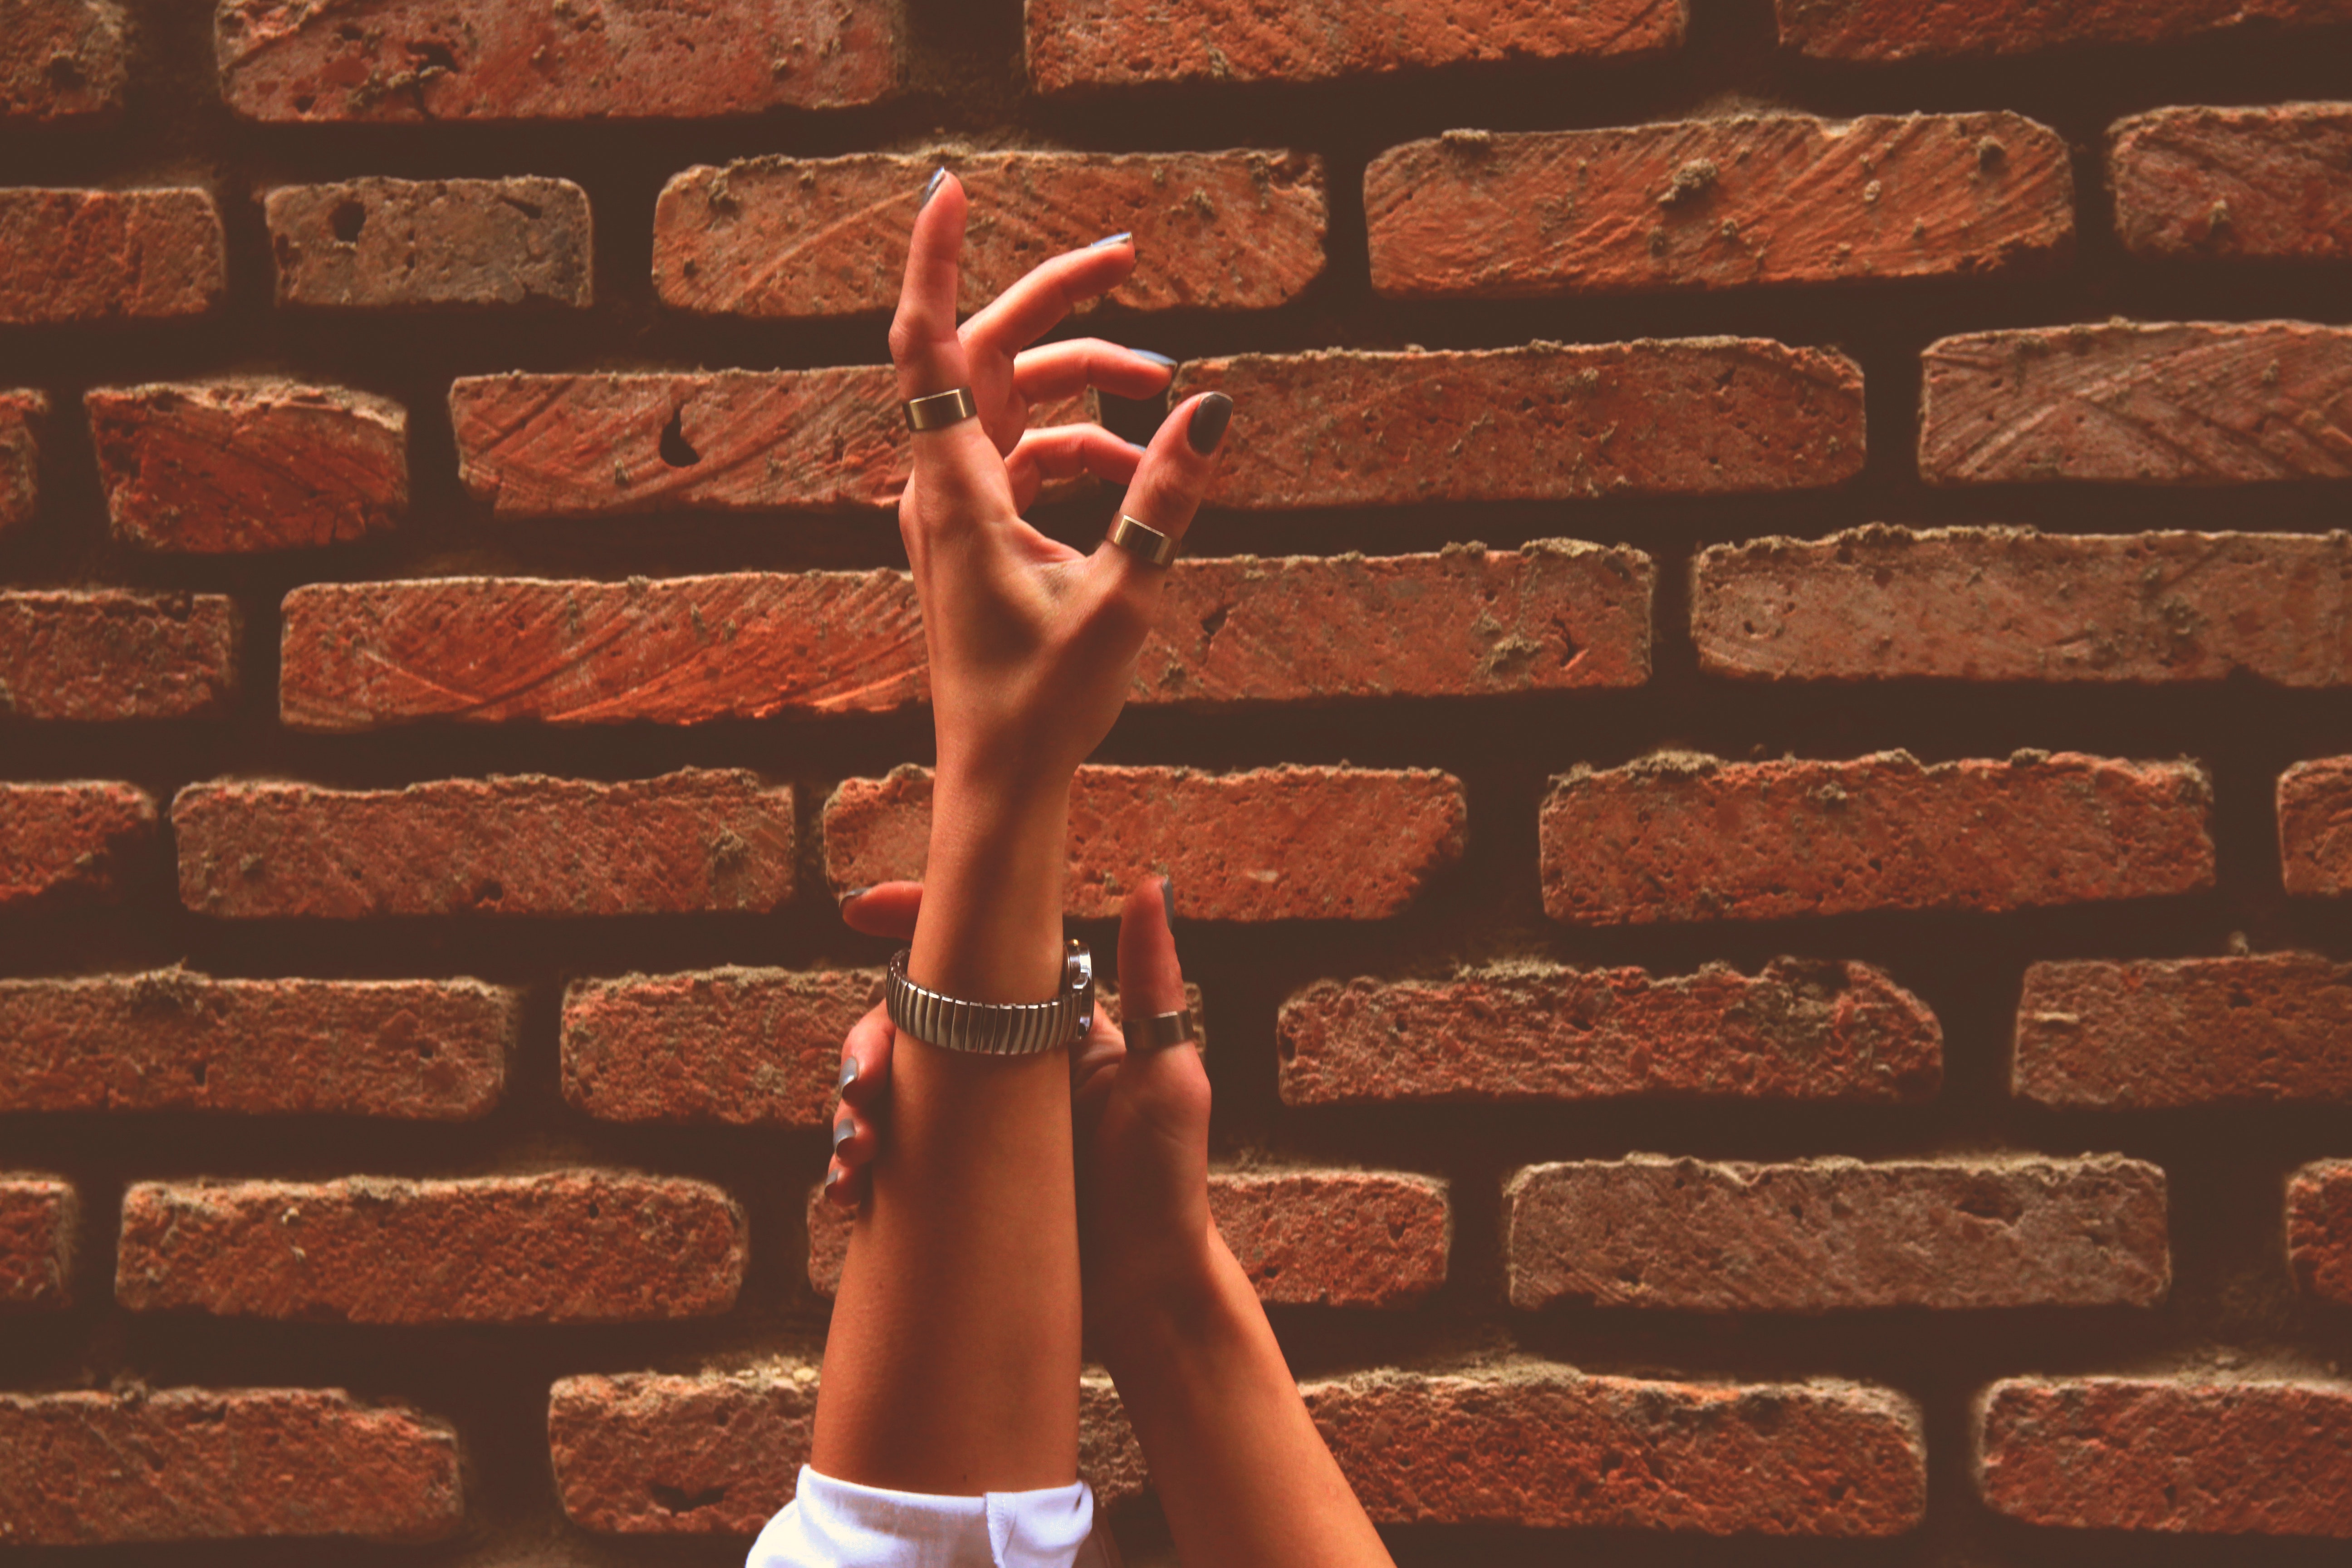 Person Wearing Watch and Rings Raising Left Hand Near Brick Wall, Accessories, Architecture, Brick, Brick wall, HQ Photo